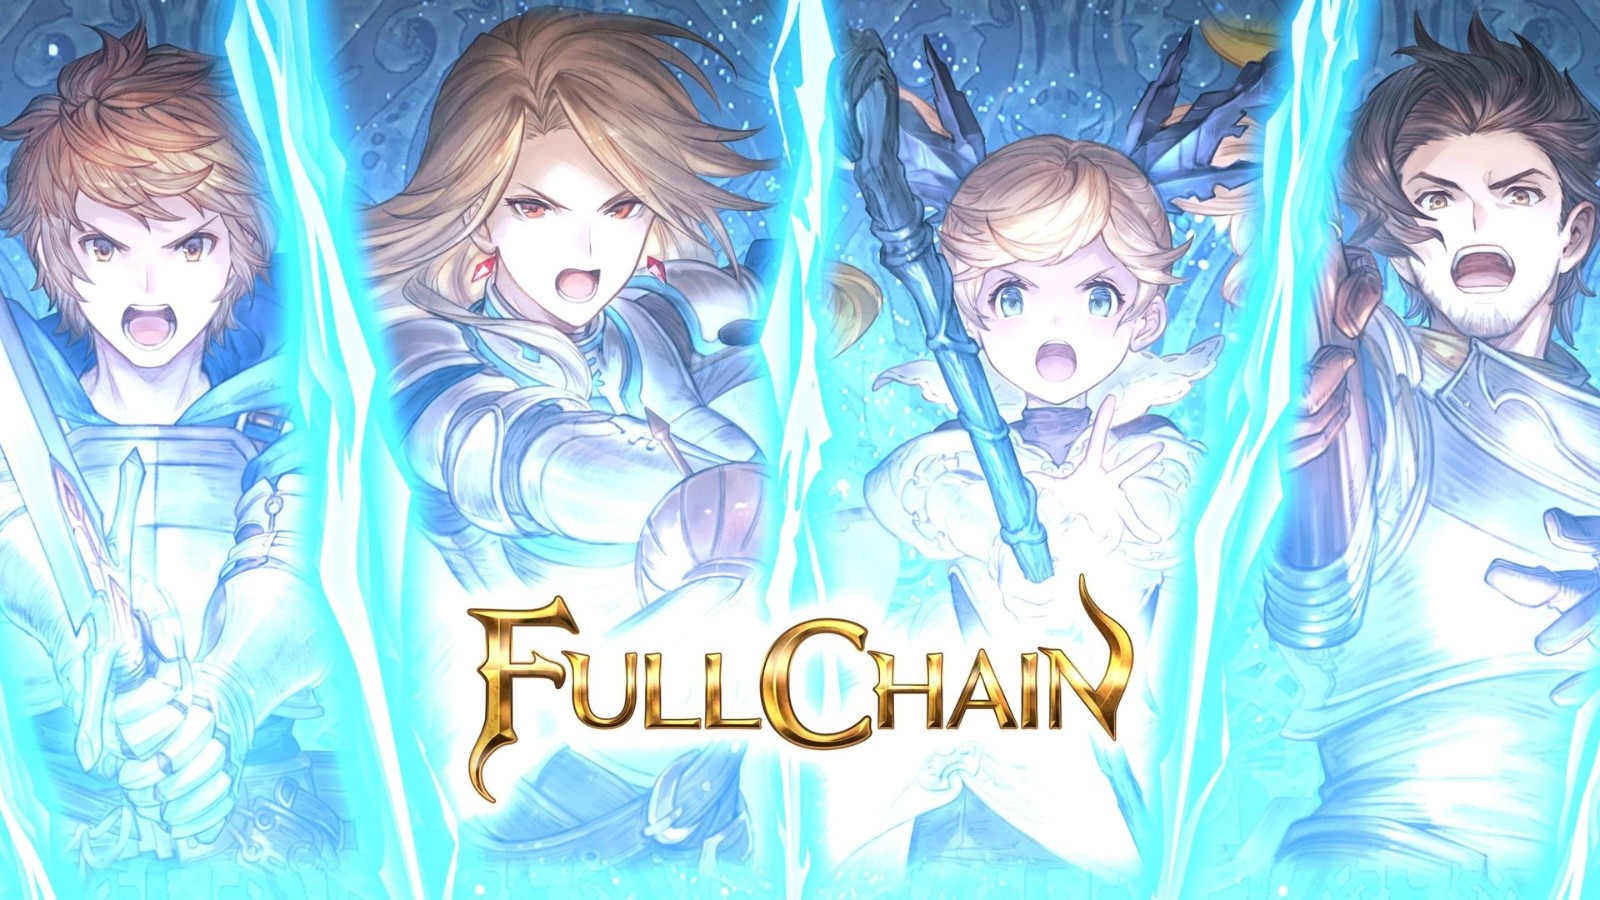 GBF Fes公布《碧蓝幻想；Relink》新截图